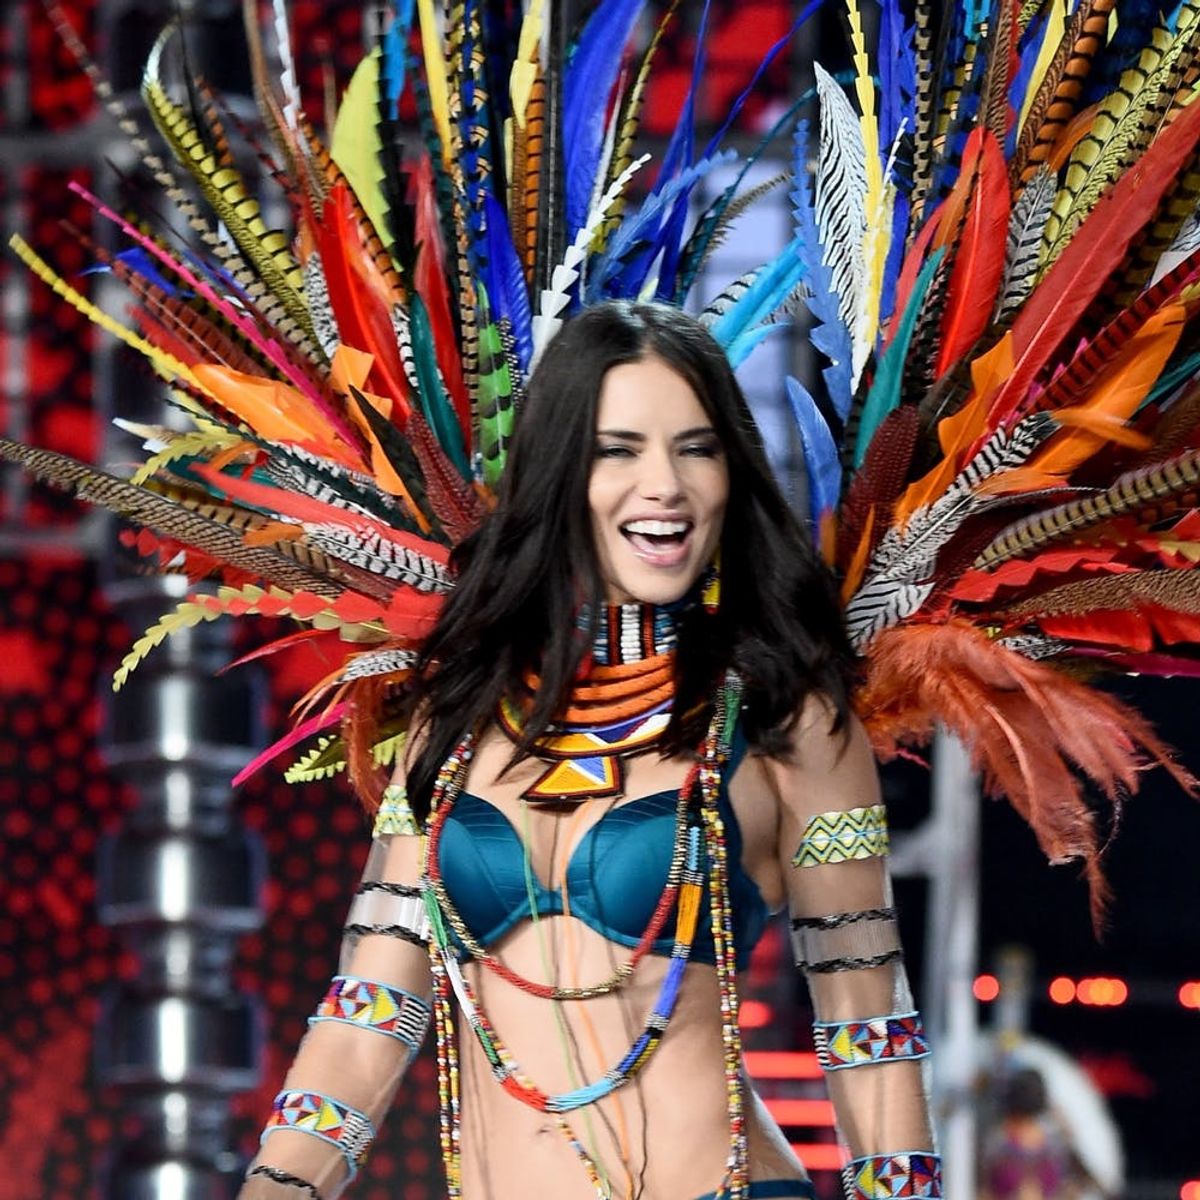 23 of the Most Naughty and Nice Looks from the 2017 Victoria’s Secret Fashion Show